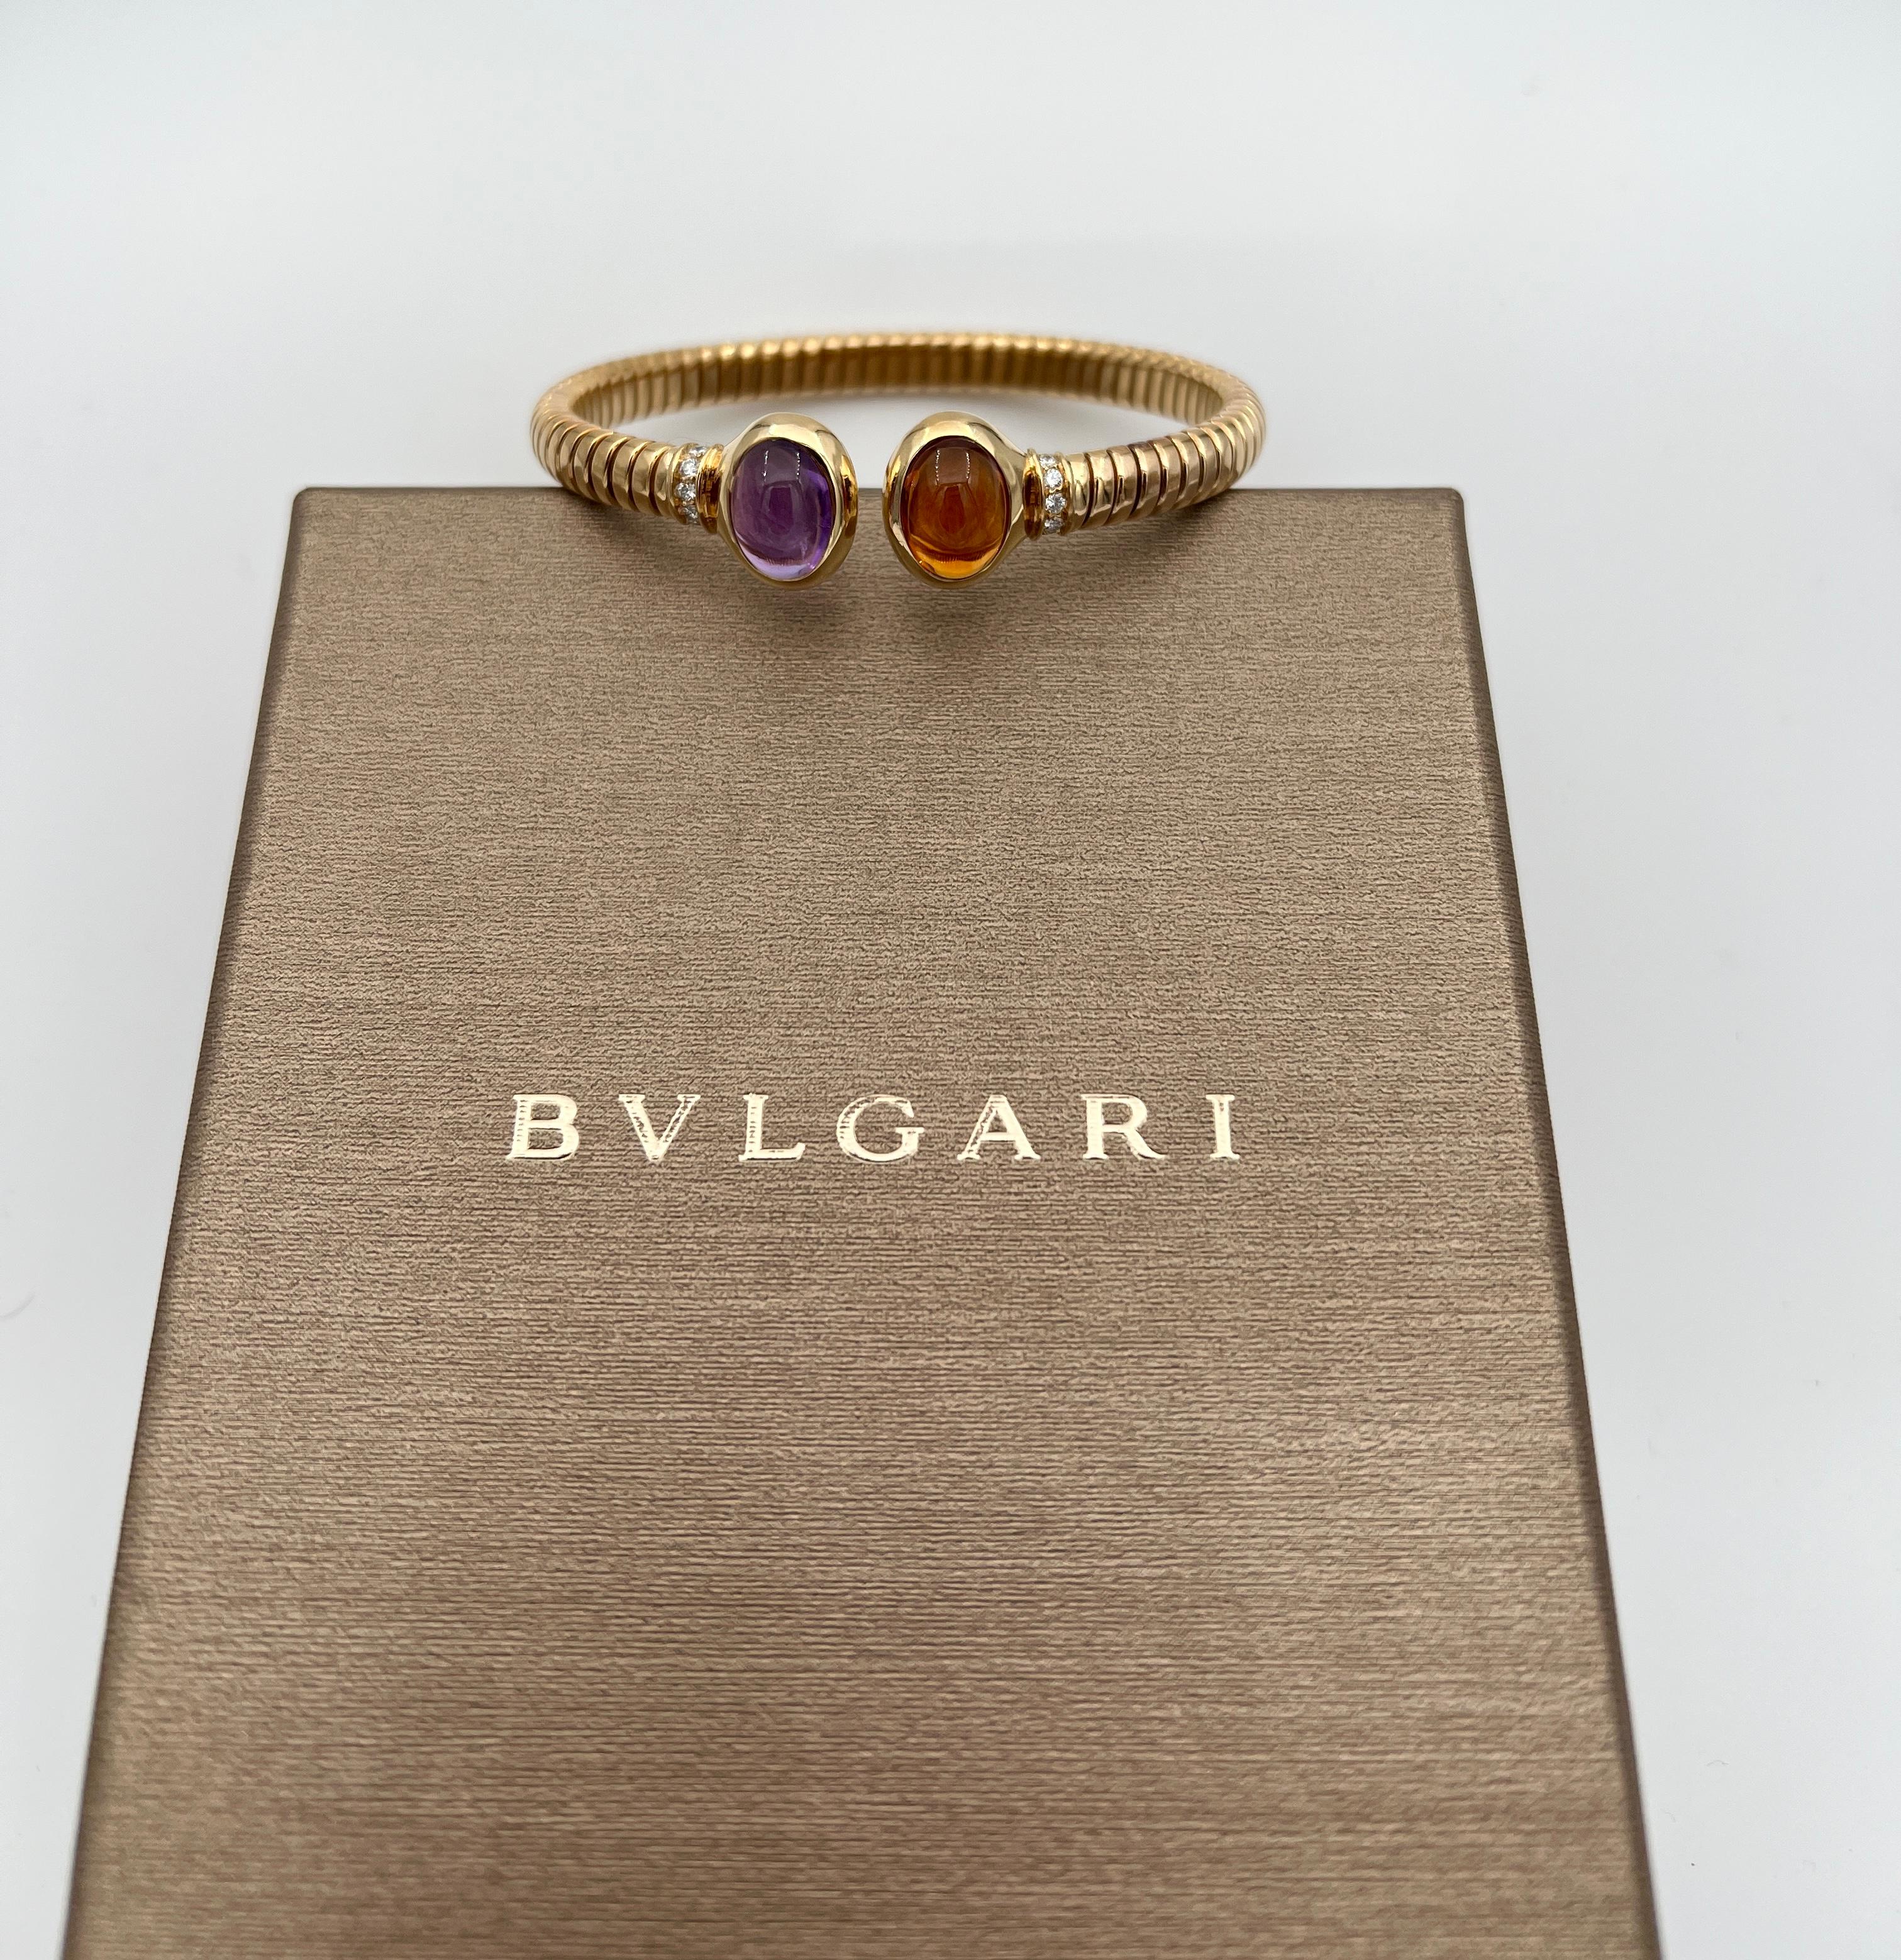 Bvlgari 18k Yellow Gold Bangle Bracelet In Excellent Condition For Sale In Chicago, IL